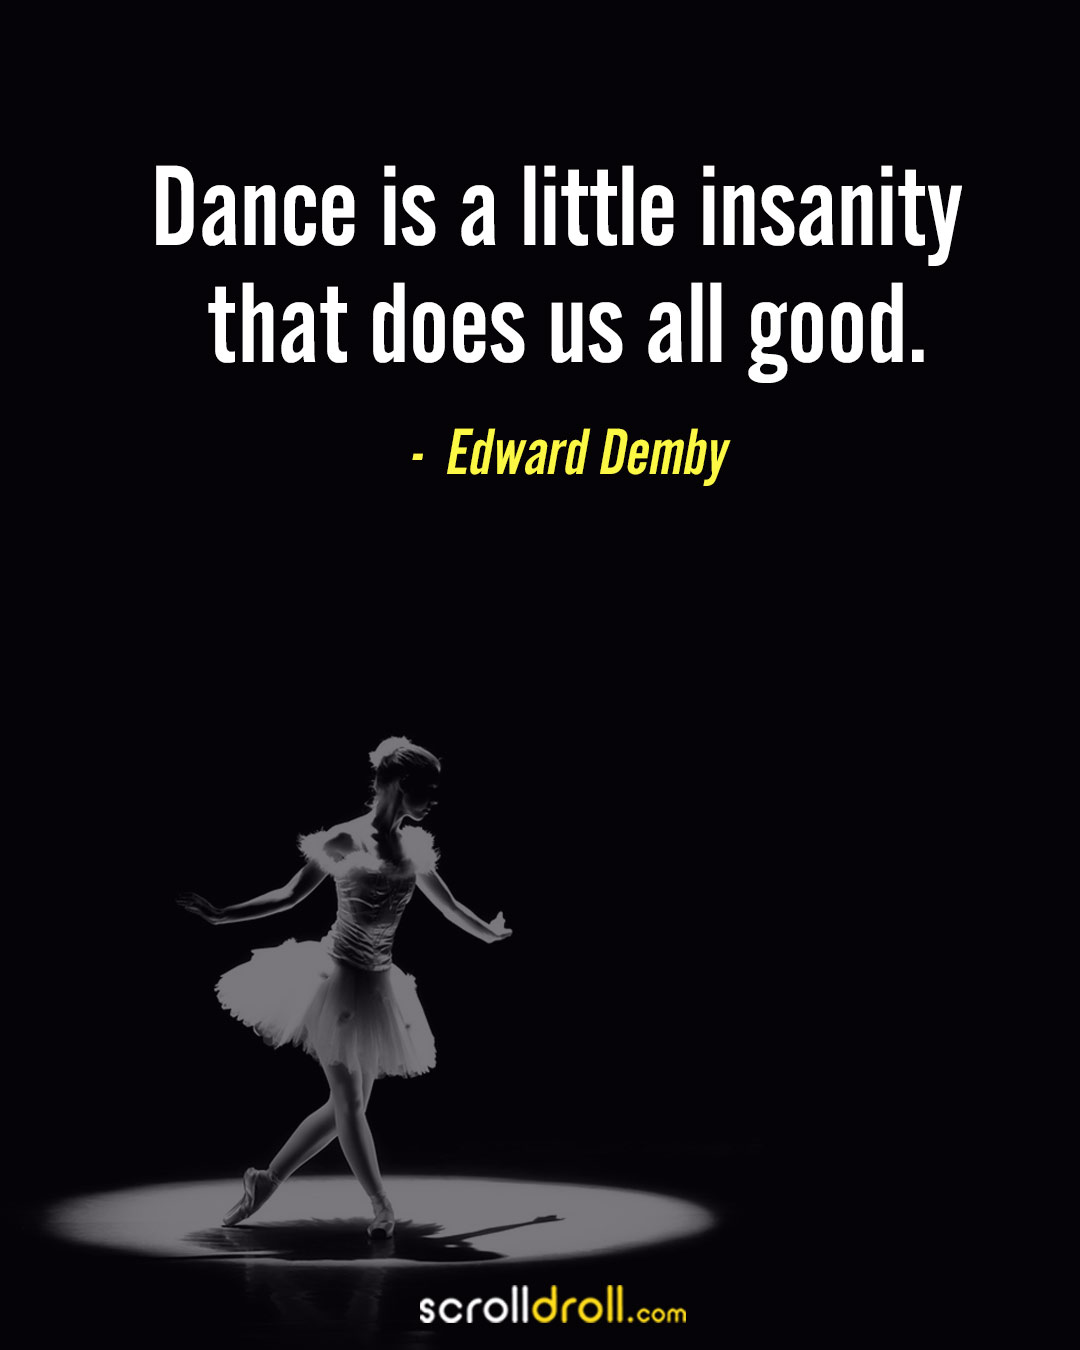 dance sayings and phrases